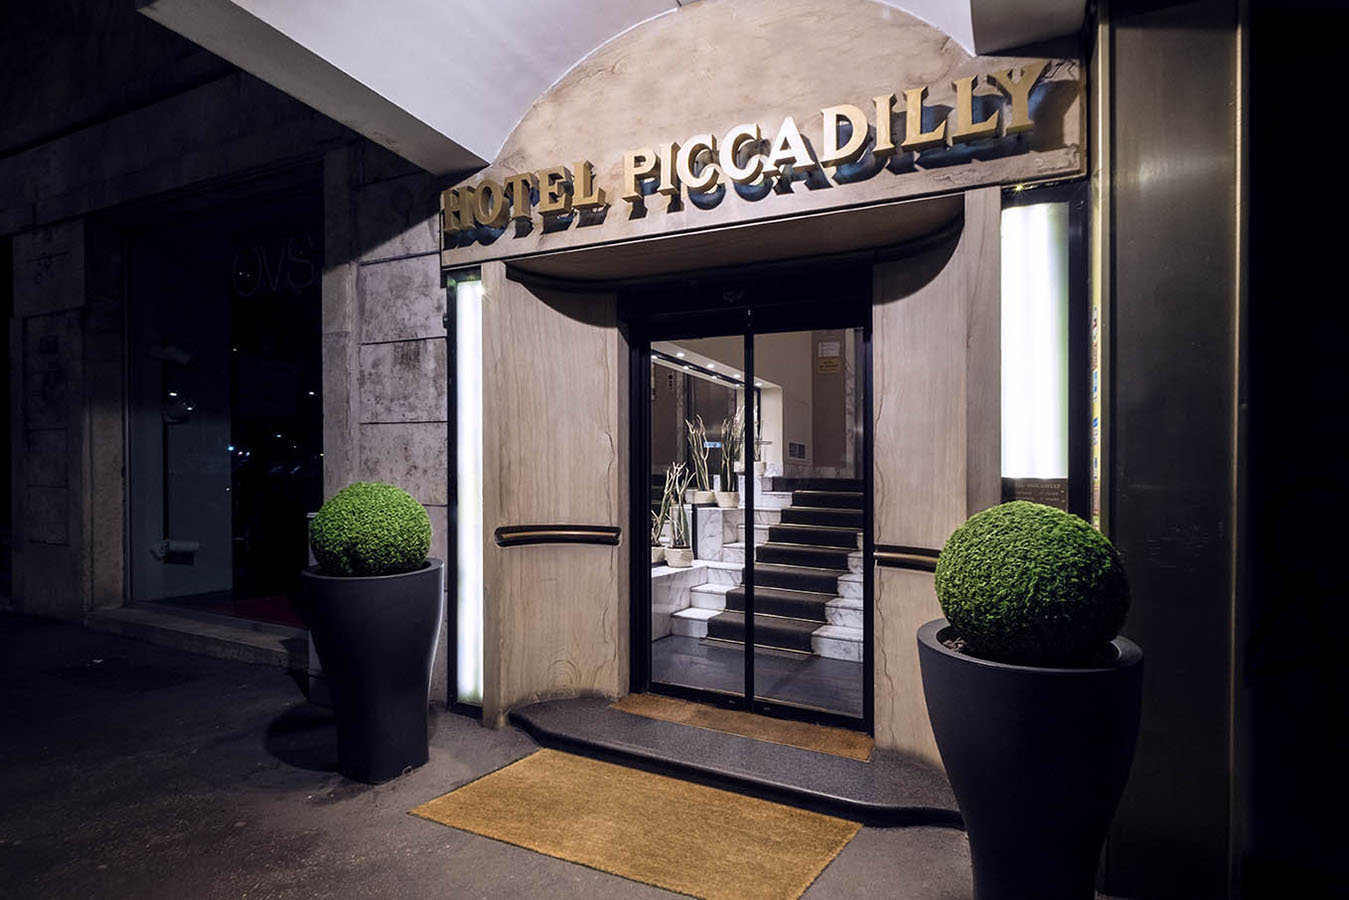 Roma - Best Western Hotel Piccadilly